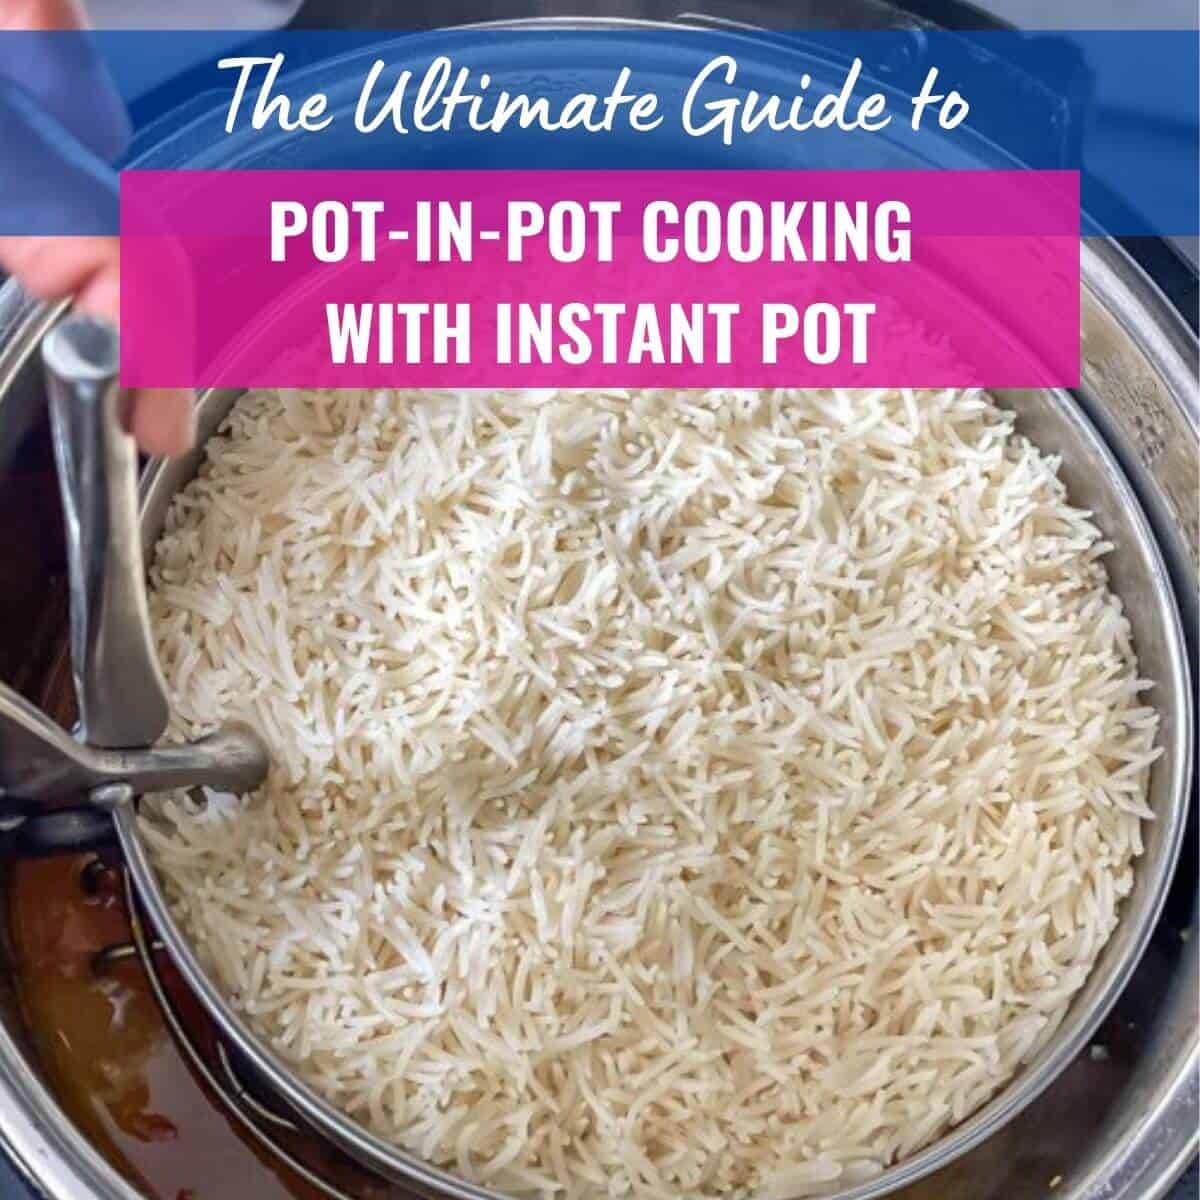 An image of rice cooked pot in pot with caption - The ultimate guide to Pot-in-Pot Cooking with Instant Pot